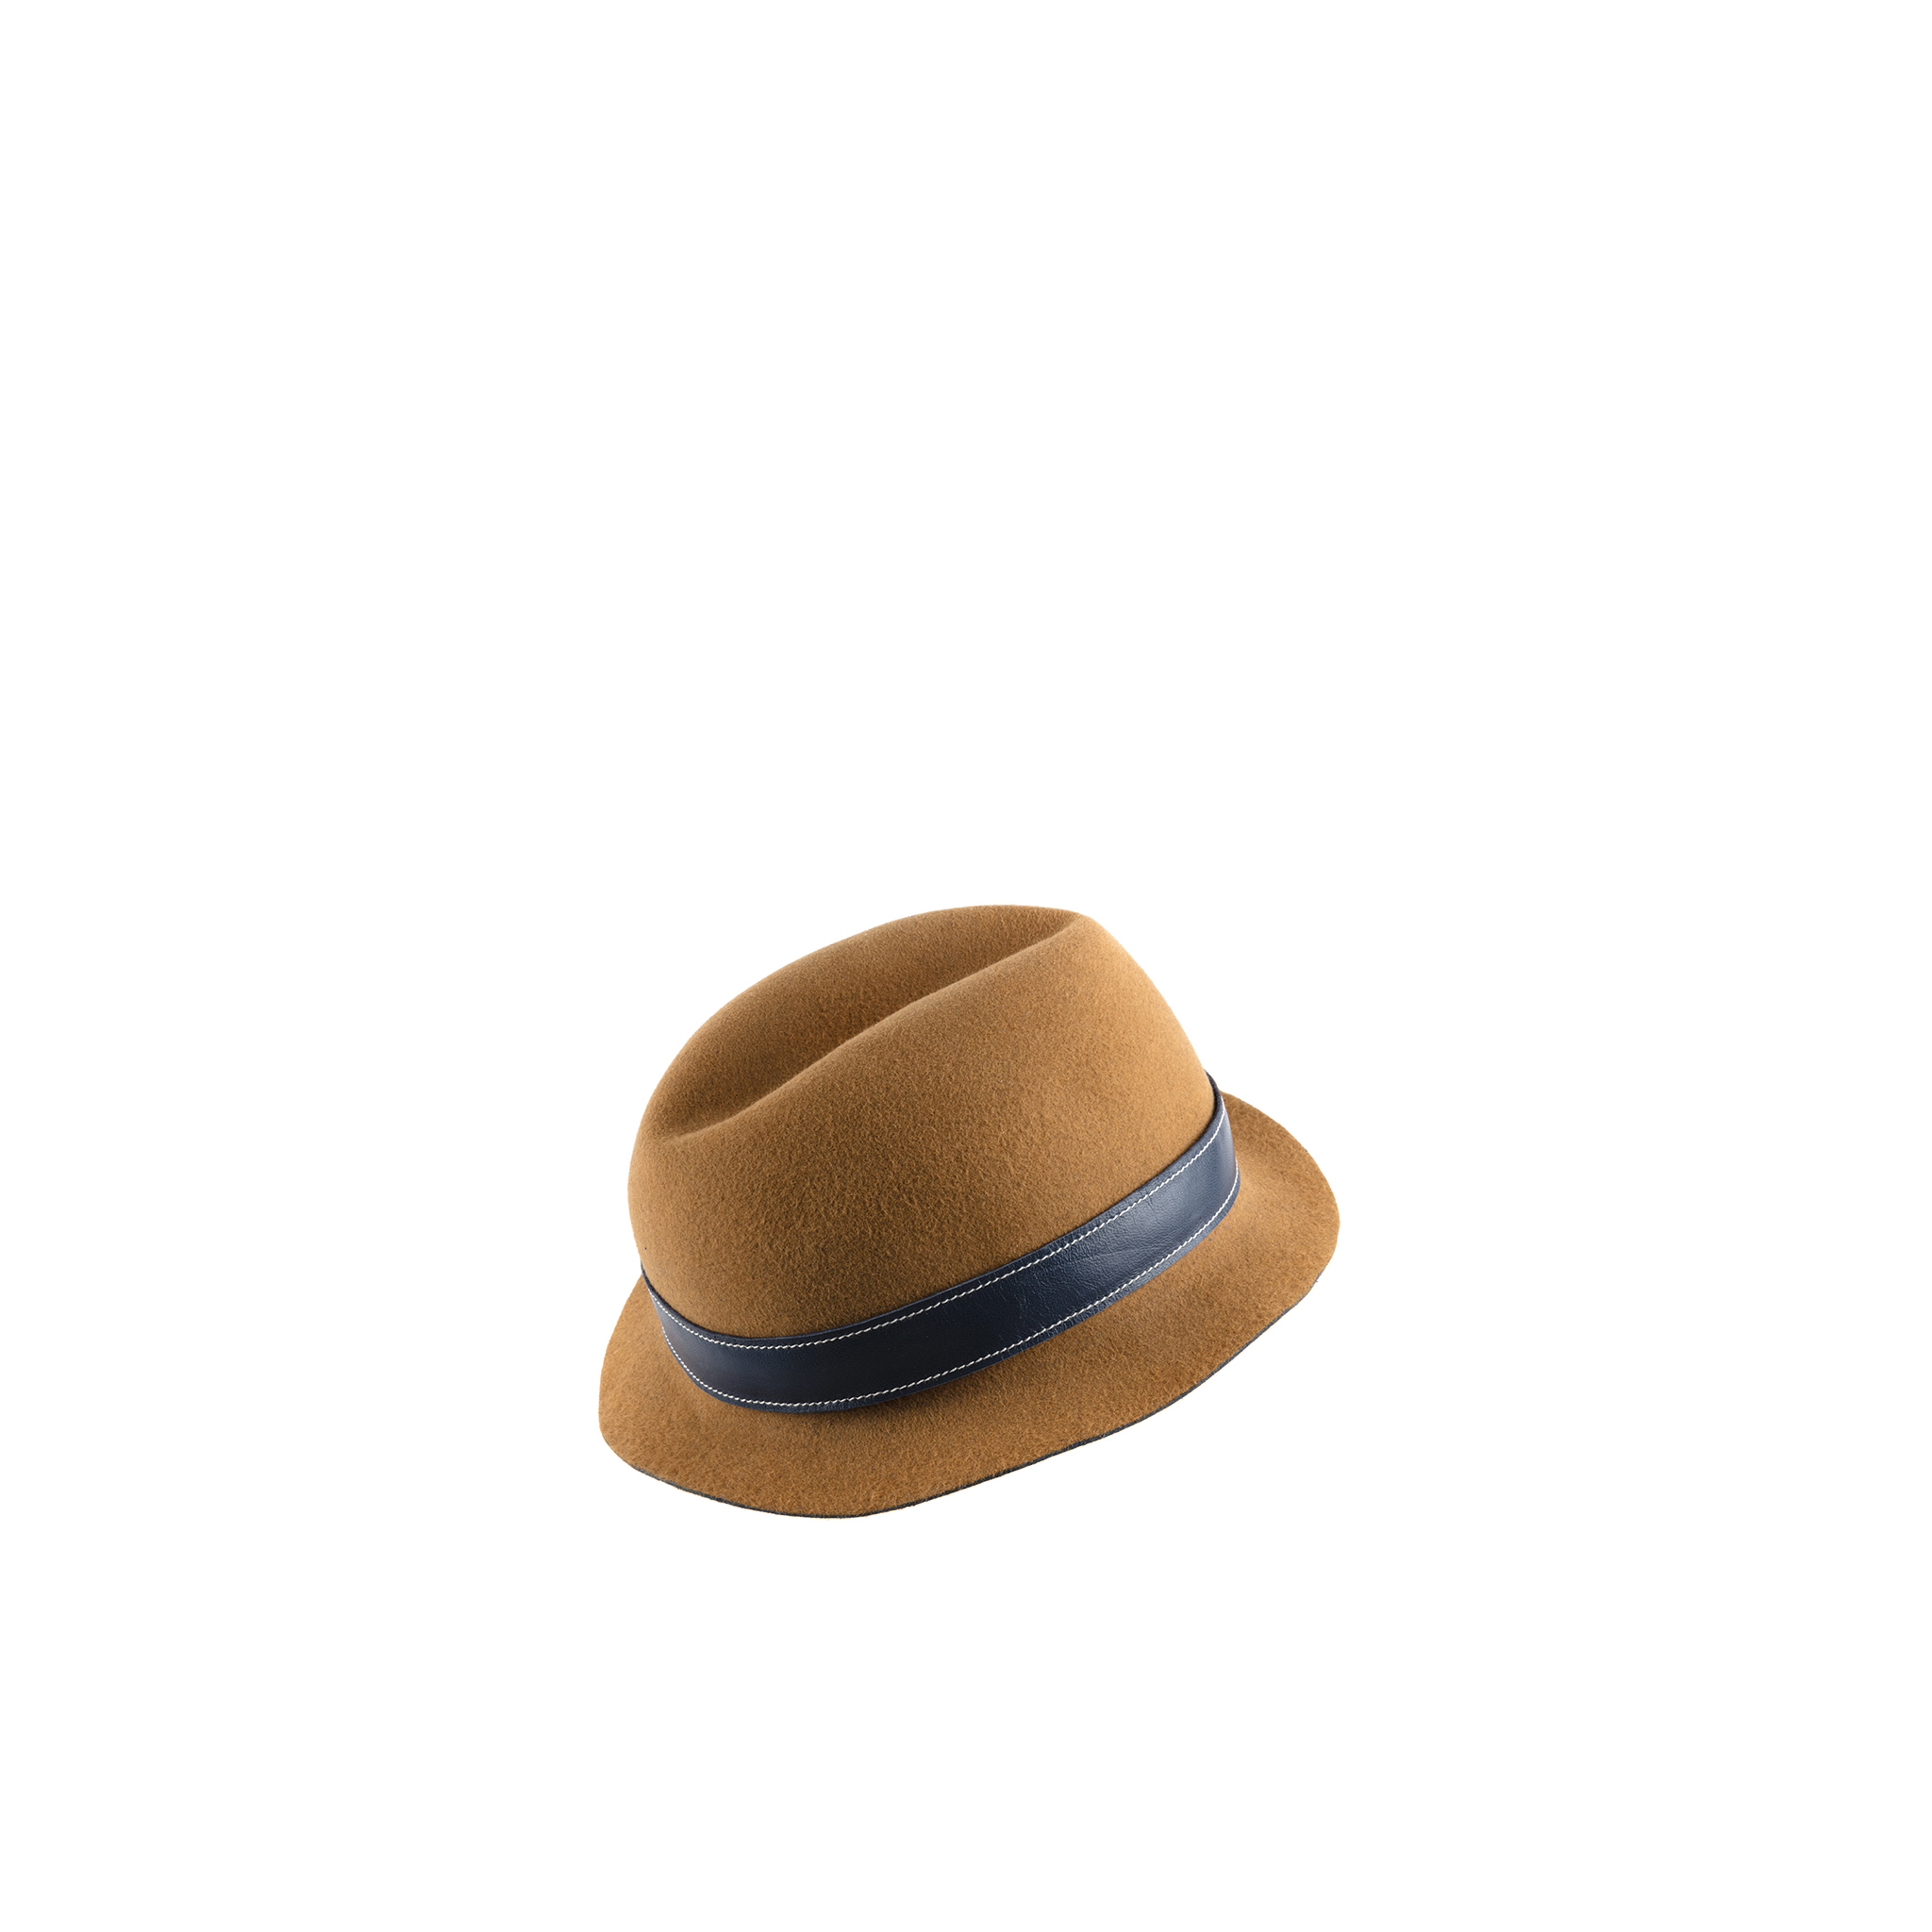 Hat N°1 - Natural felter and glossy leather - Camel color